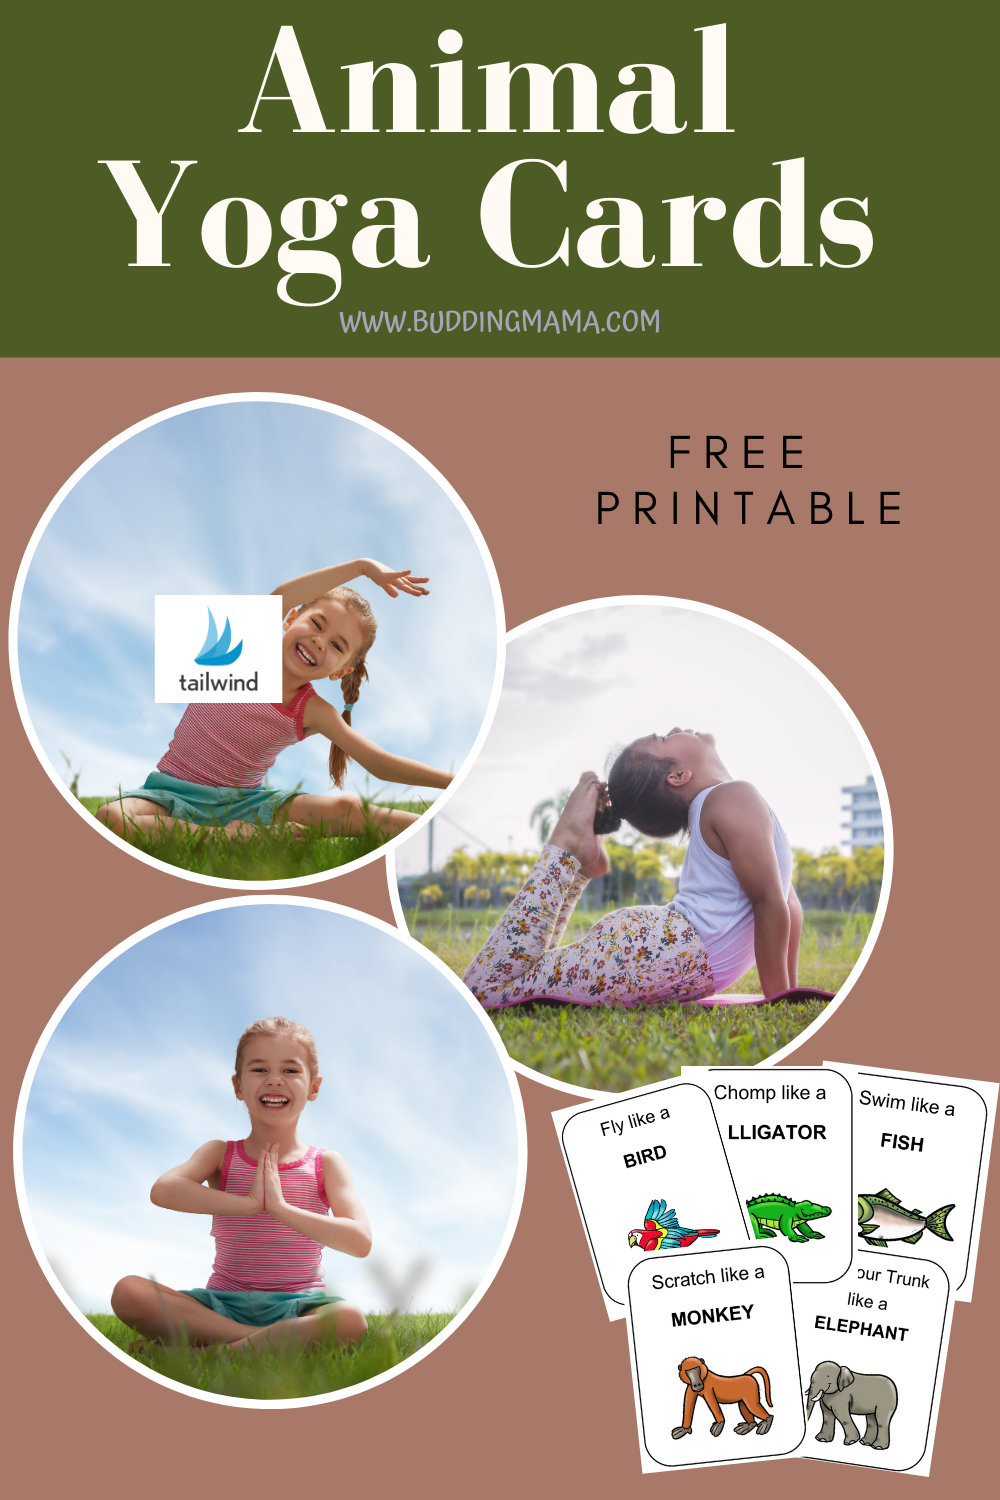 Fun Animal Yoga Cards To Keep Your Little Ones Active Budding Mama